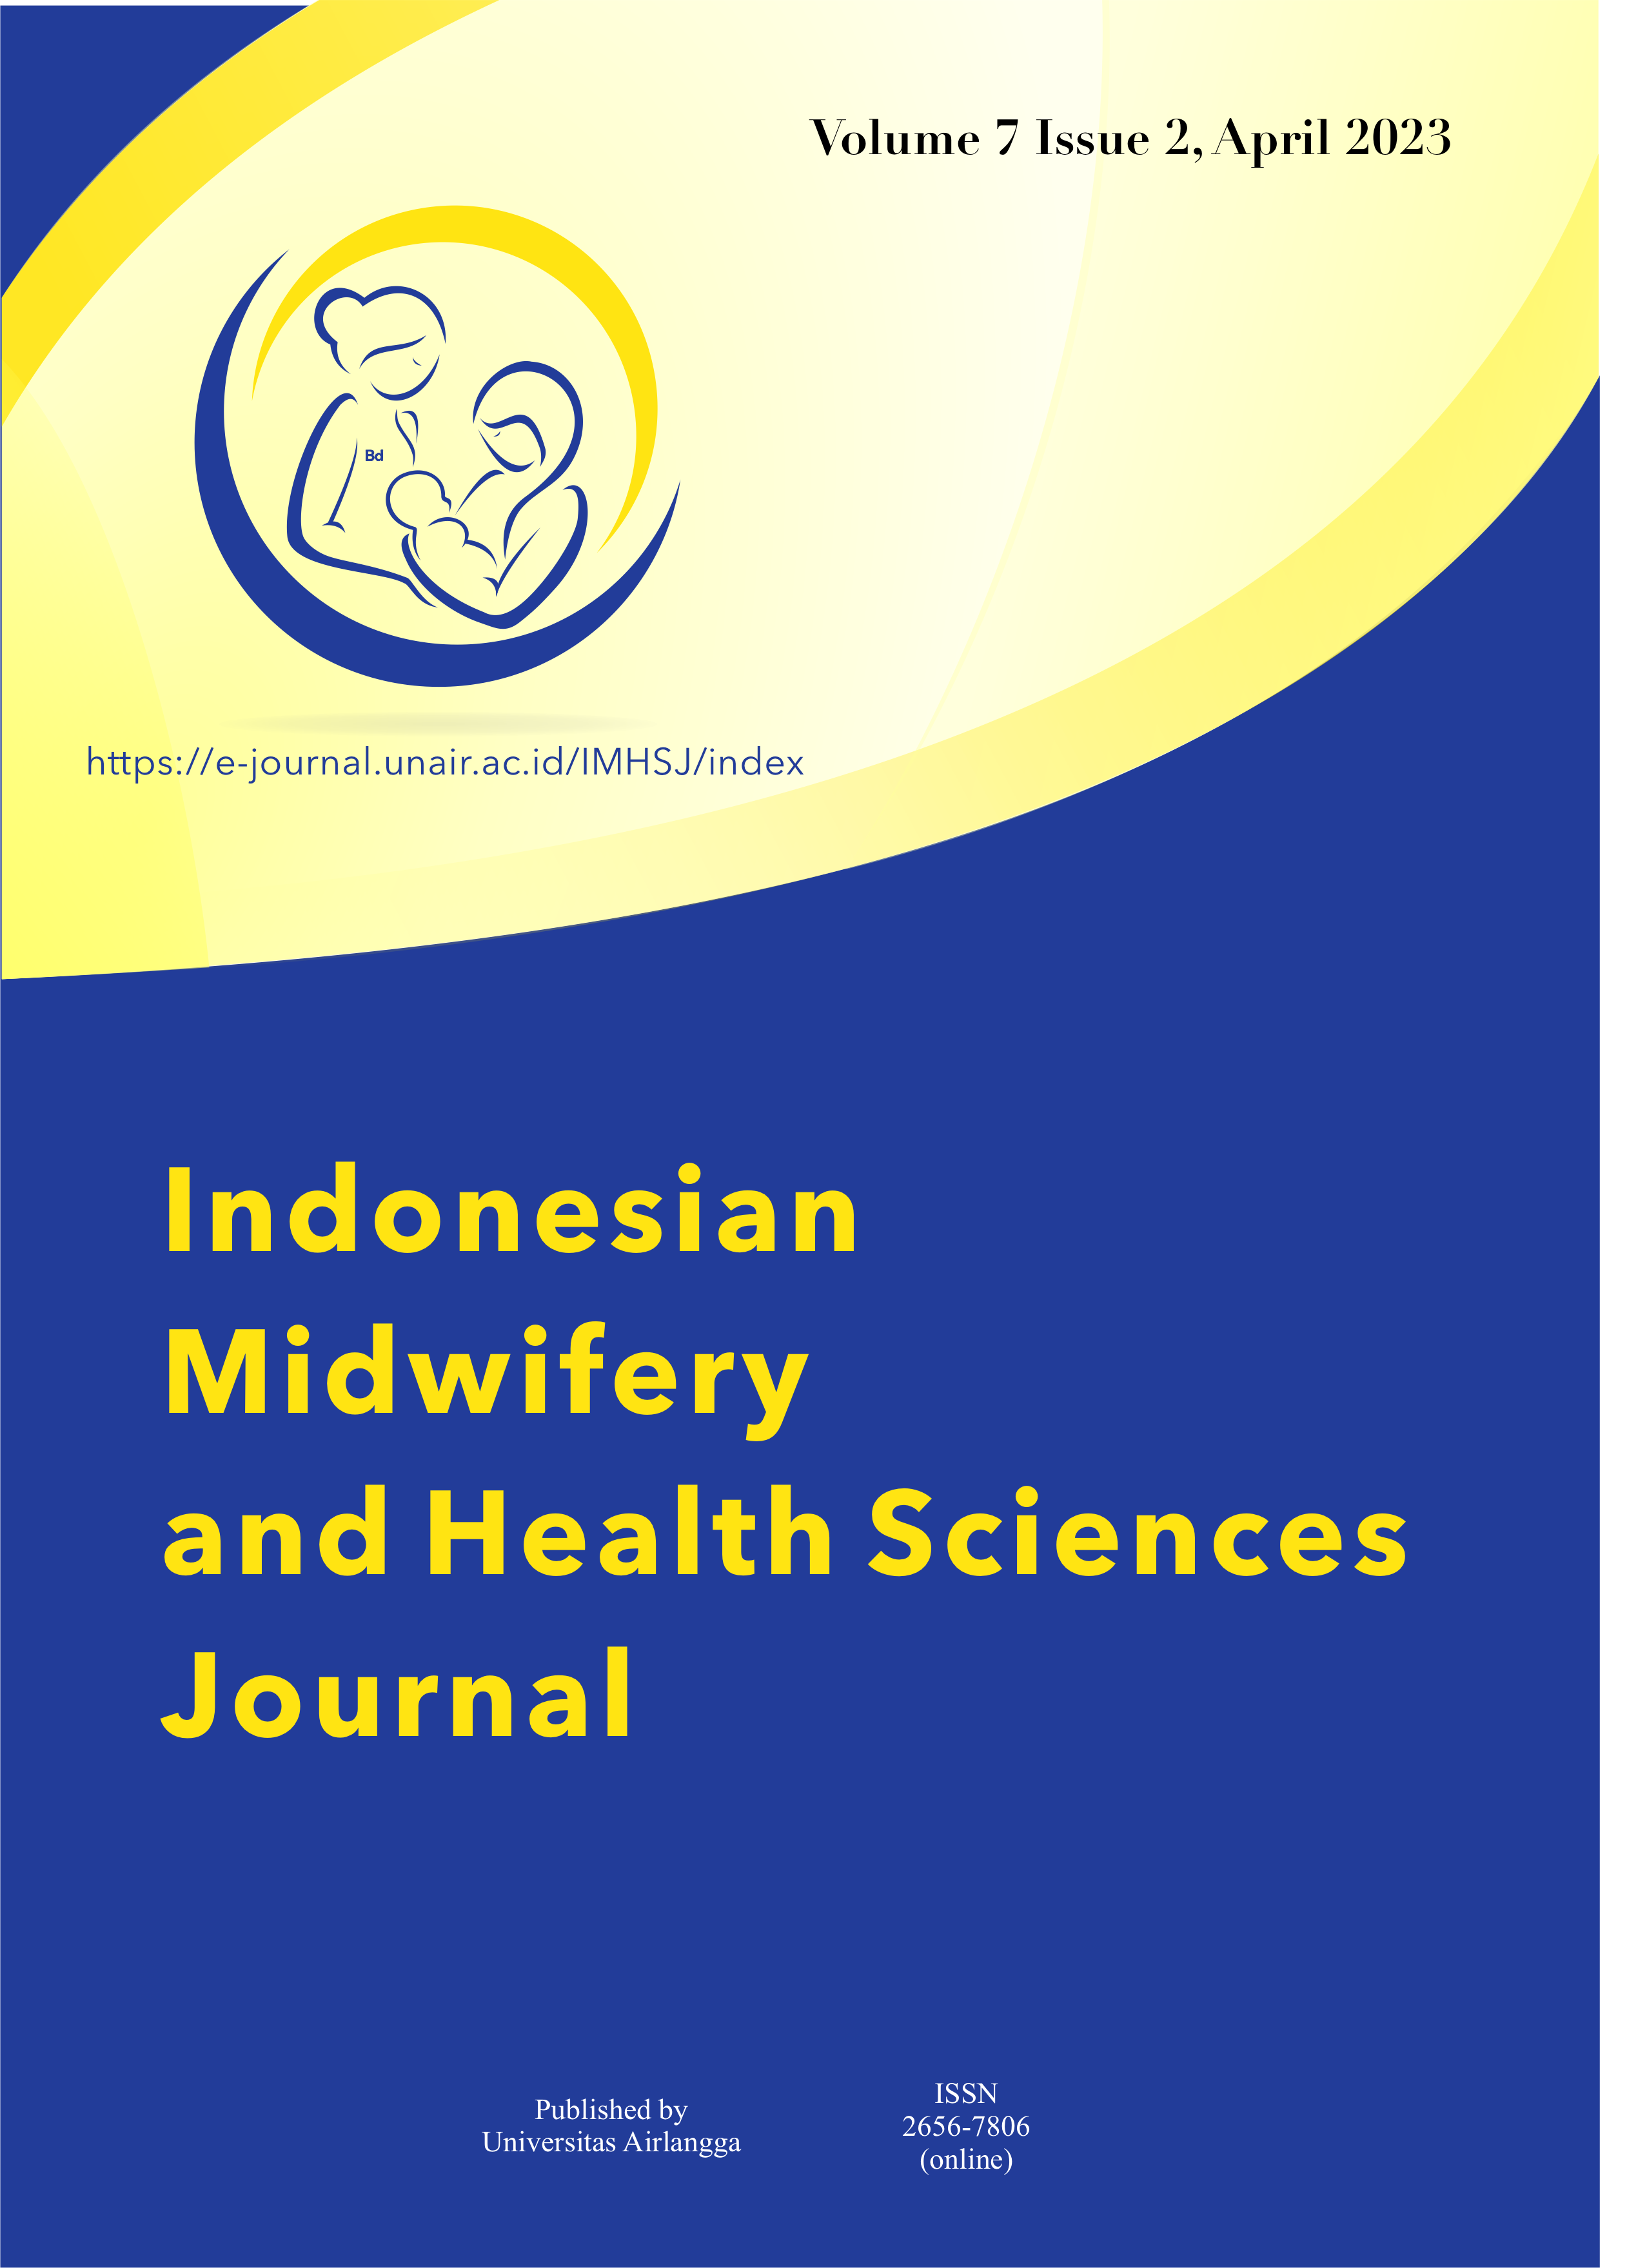 						View Vol. 7 No. 2 (2023): Indonesian Midwifery and Health Sciences Journal, April 2023
					